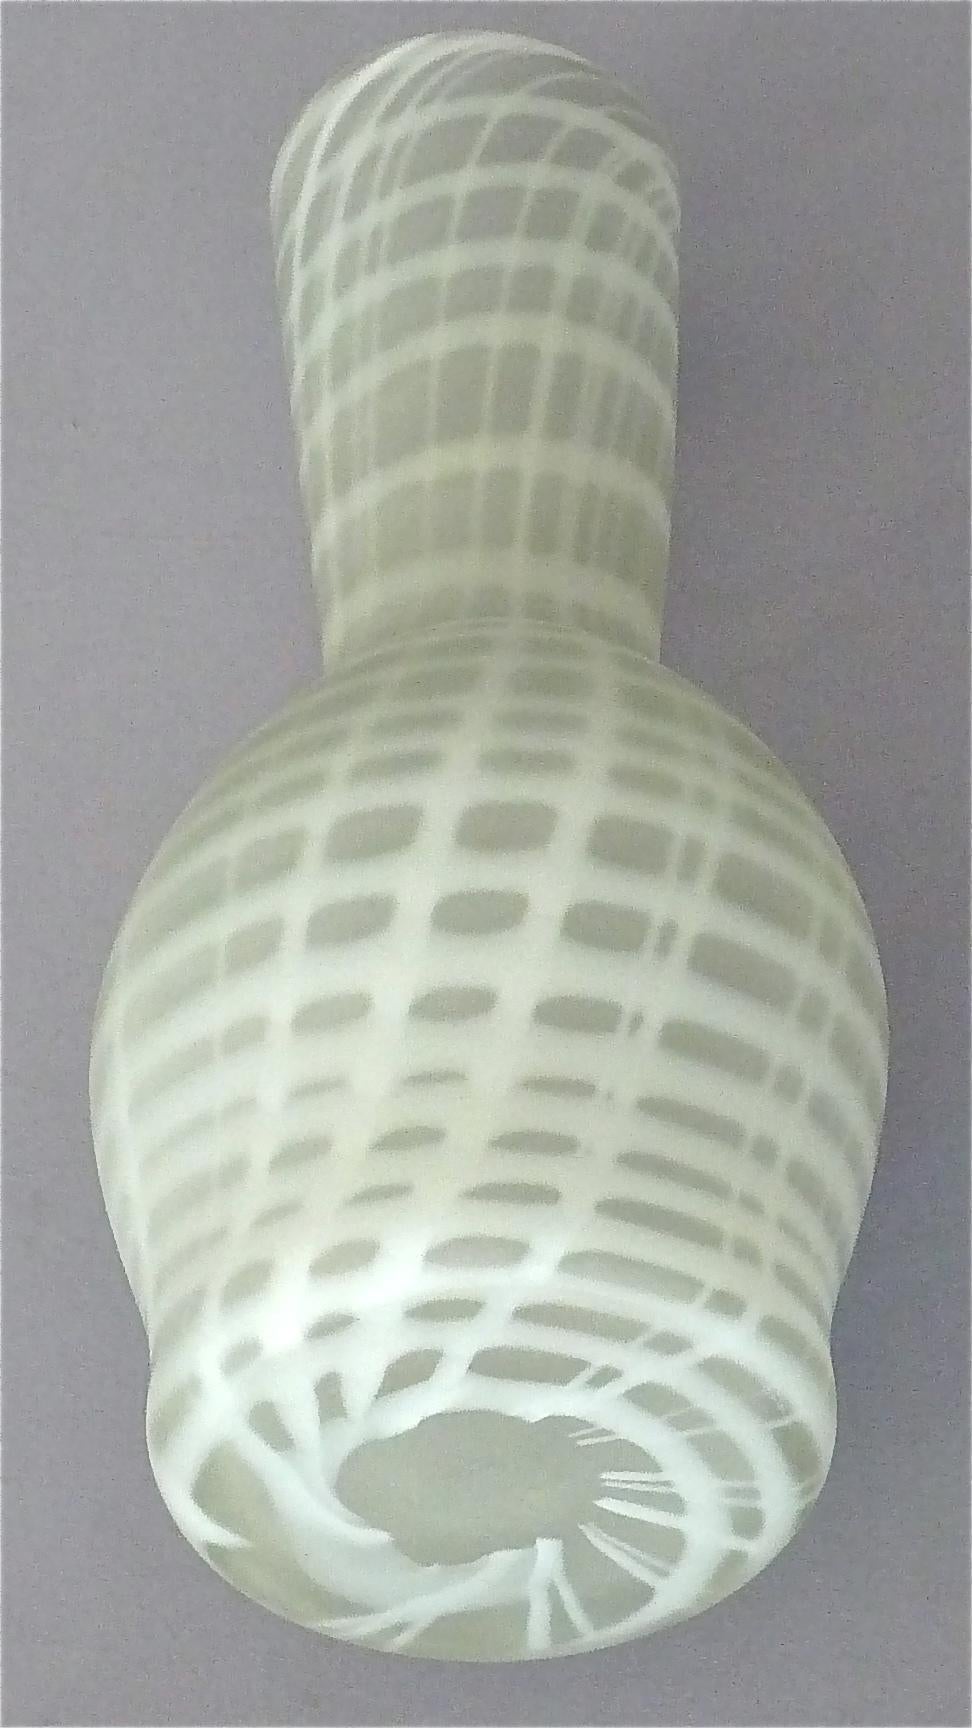 Signed Large Giuliano Tosi Art Glass Vase Satin White Stripes, Italy, 1970s For Sale 1